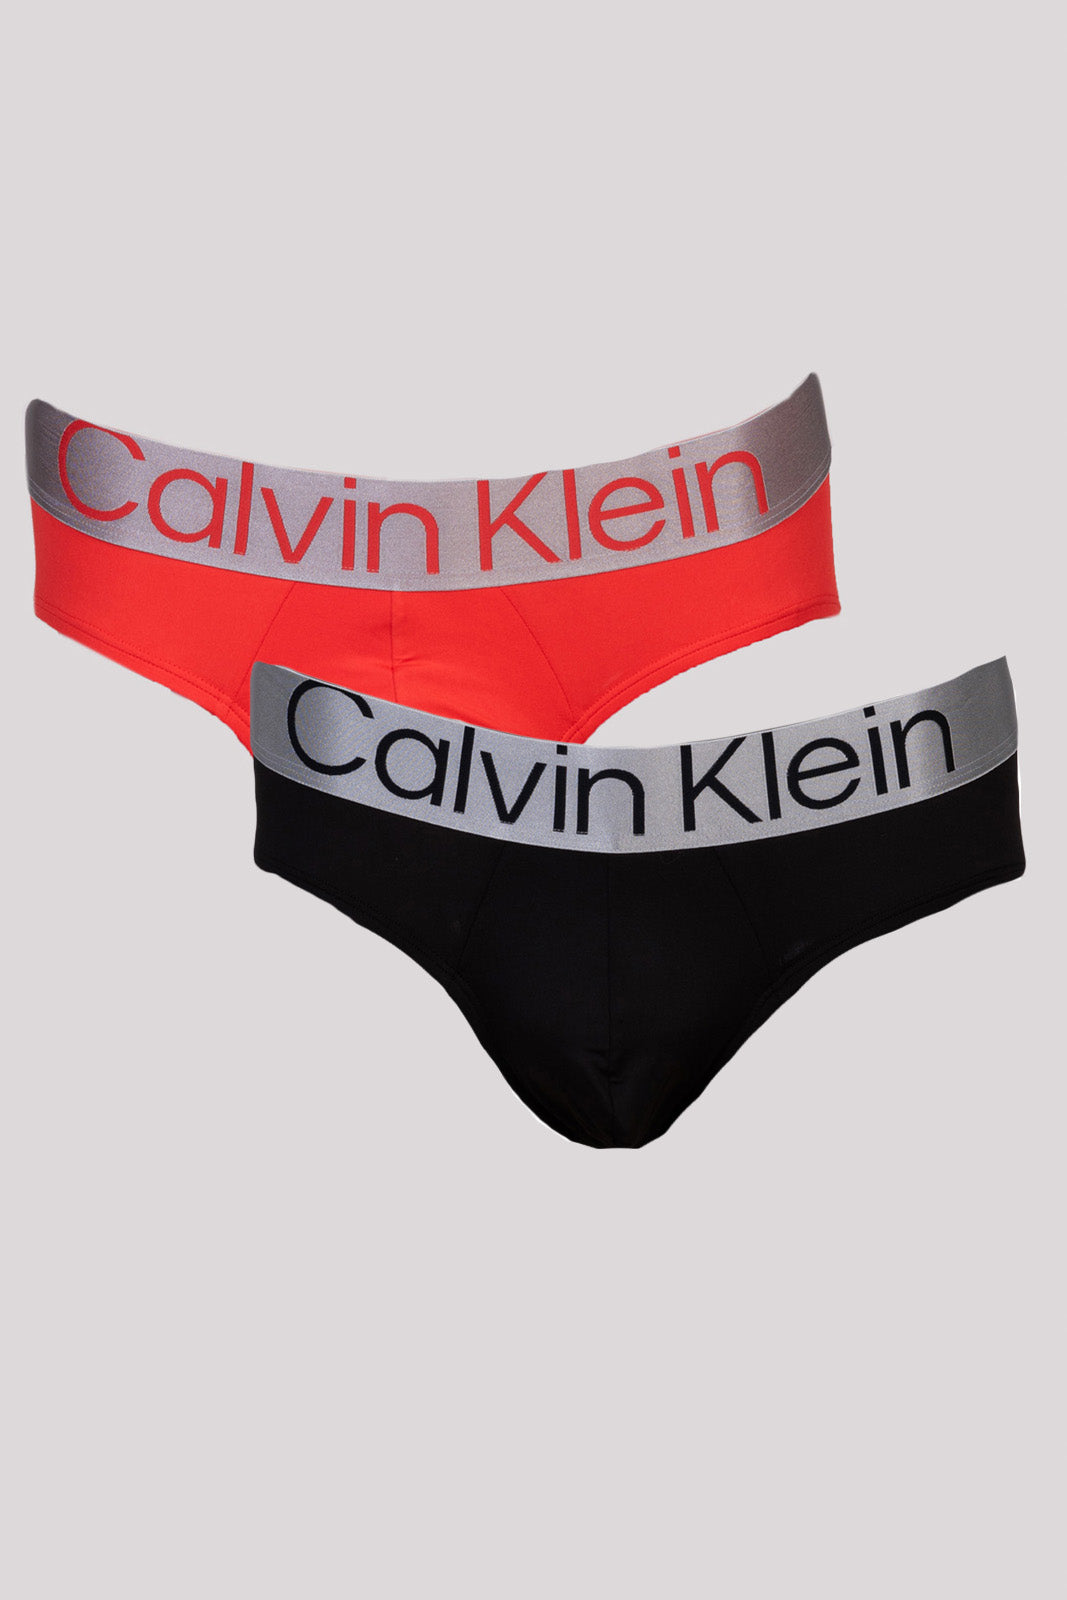 CALVIN KLEIN 2 PACK Briefs Size S Two Tone Elastic Branded Waistband gallery main photo